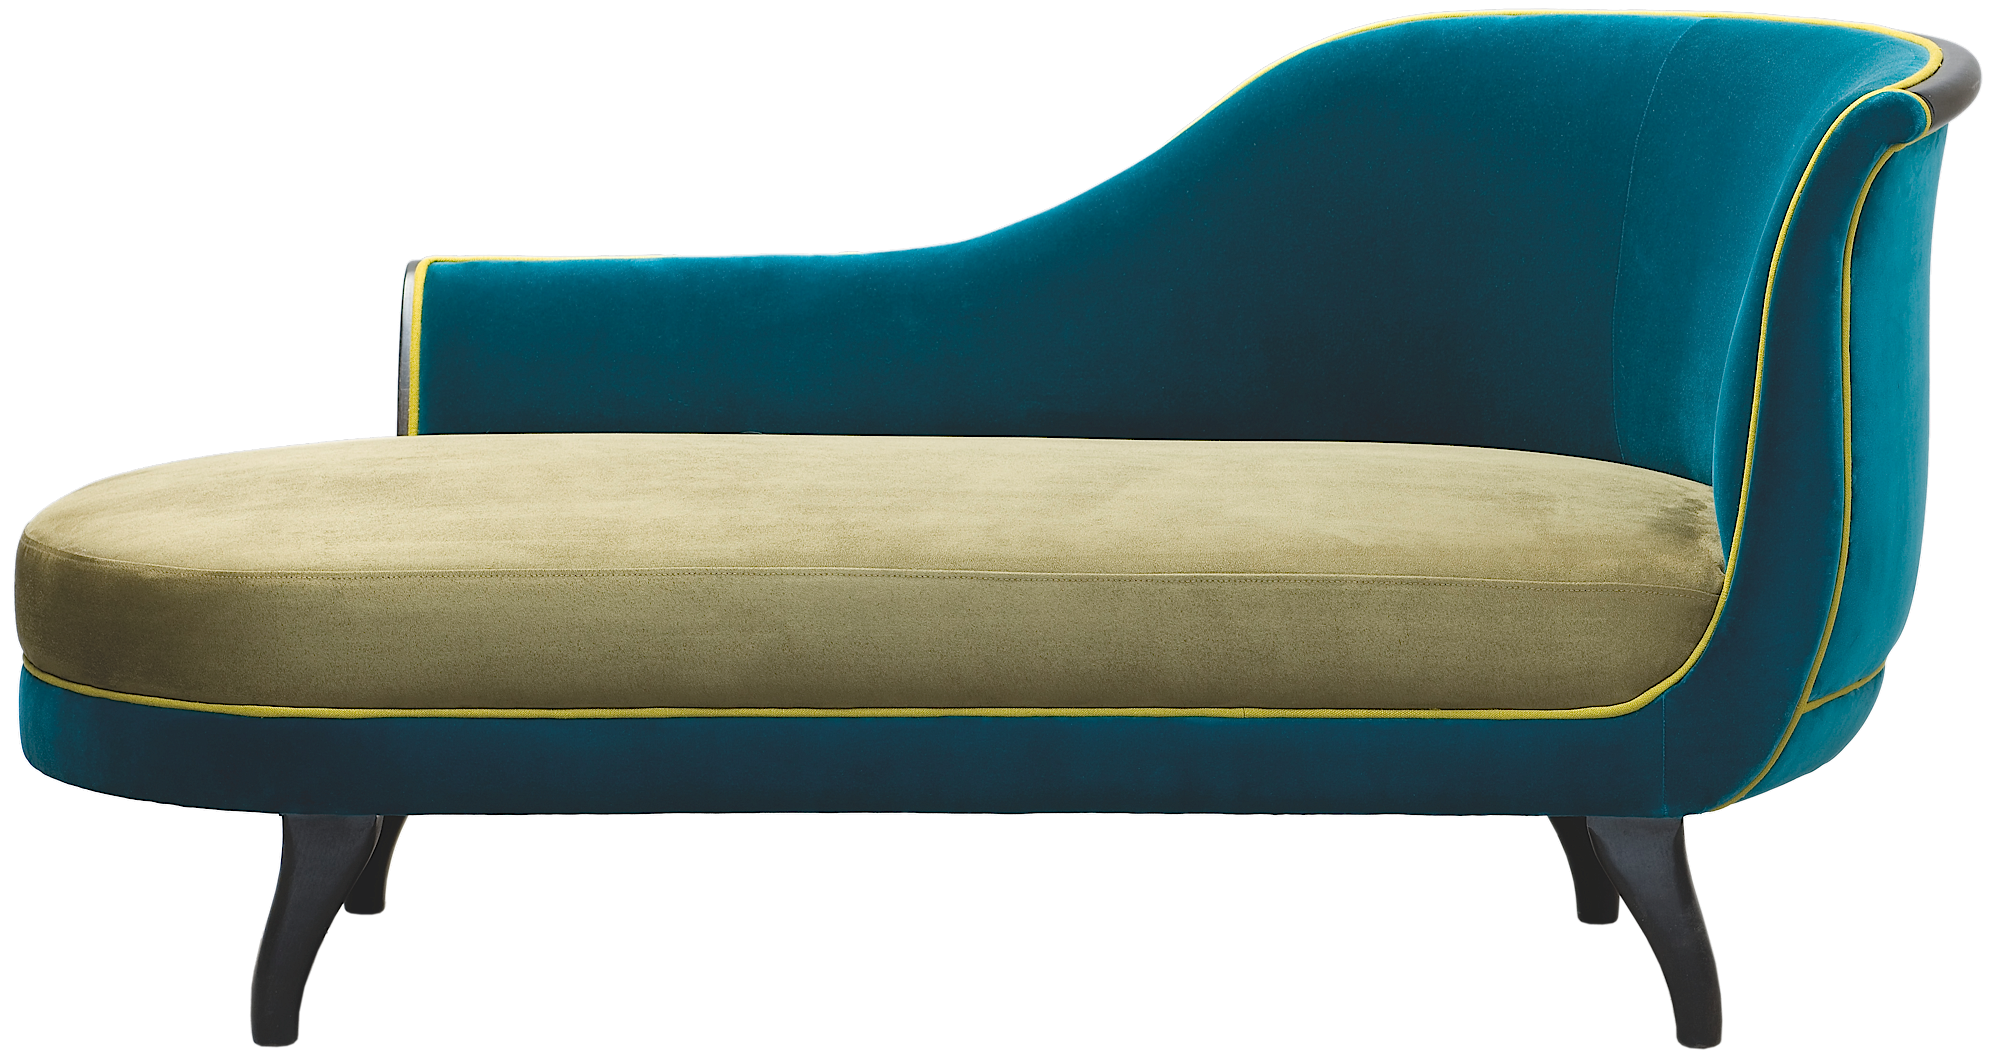 Chaise Longue Free HD Image PNG Image